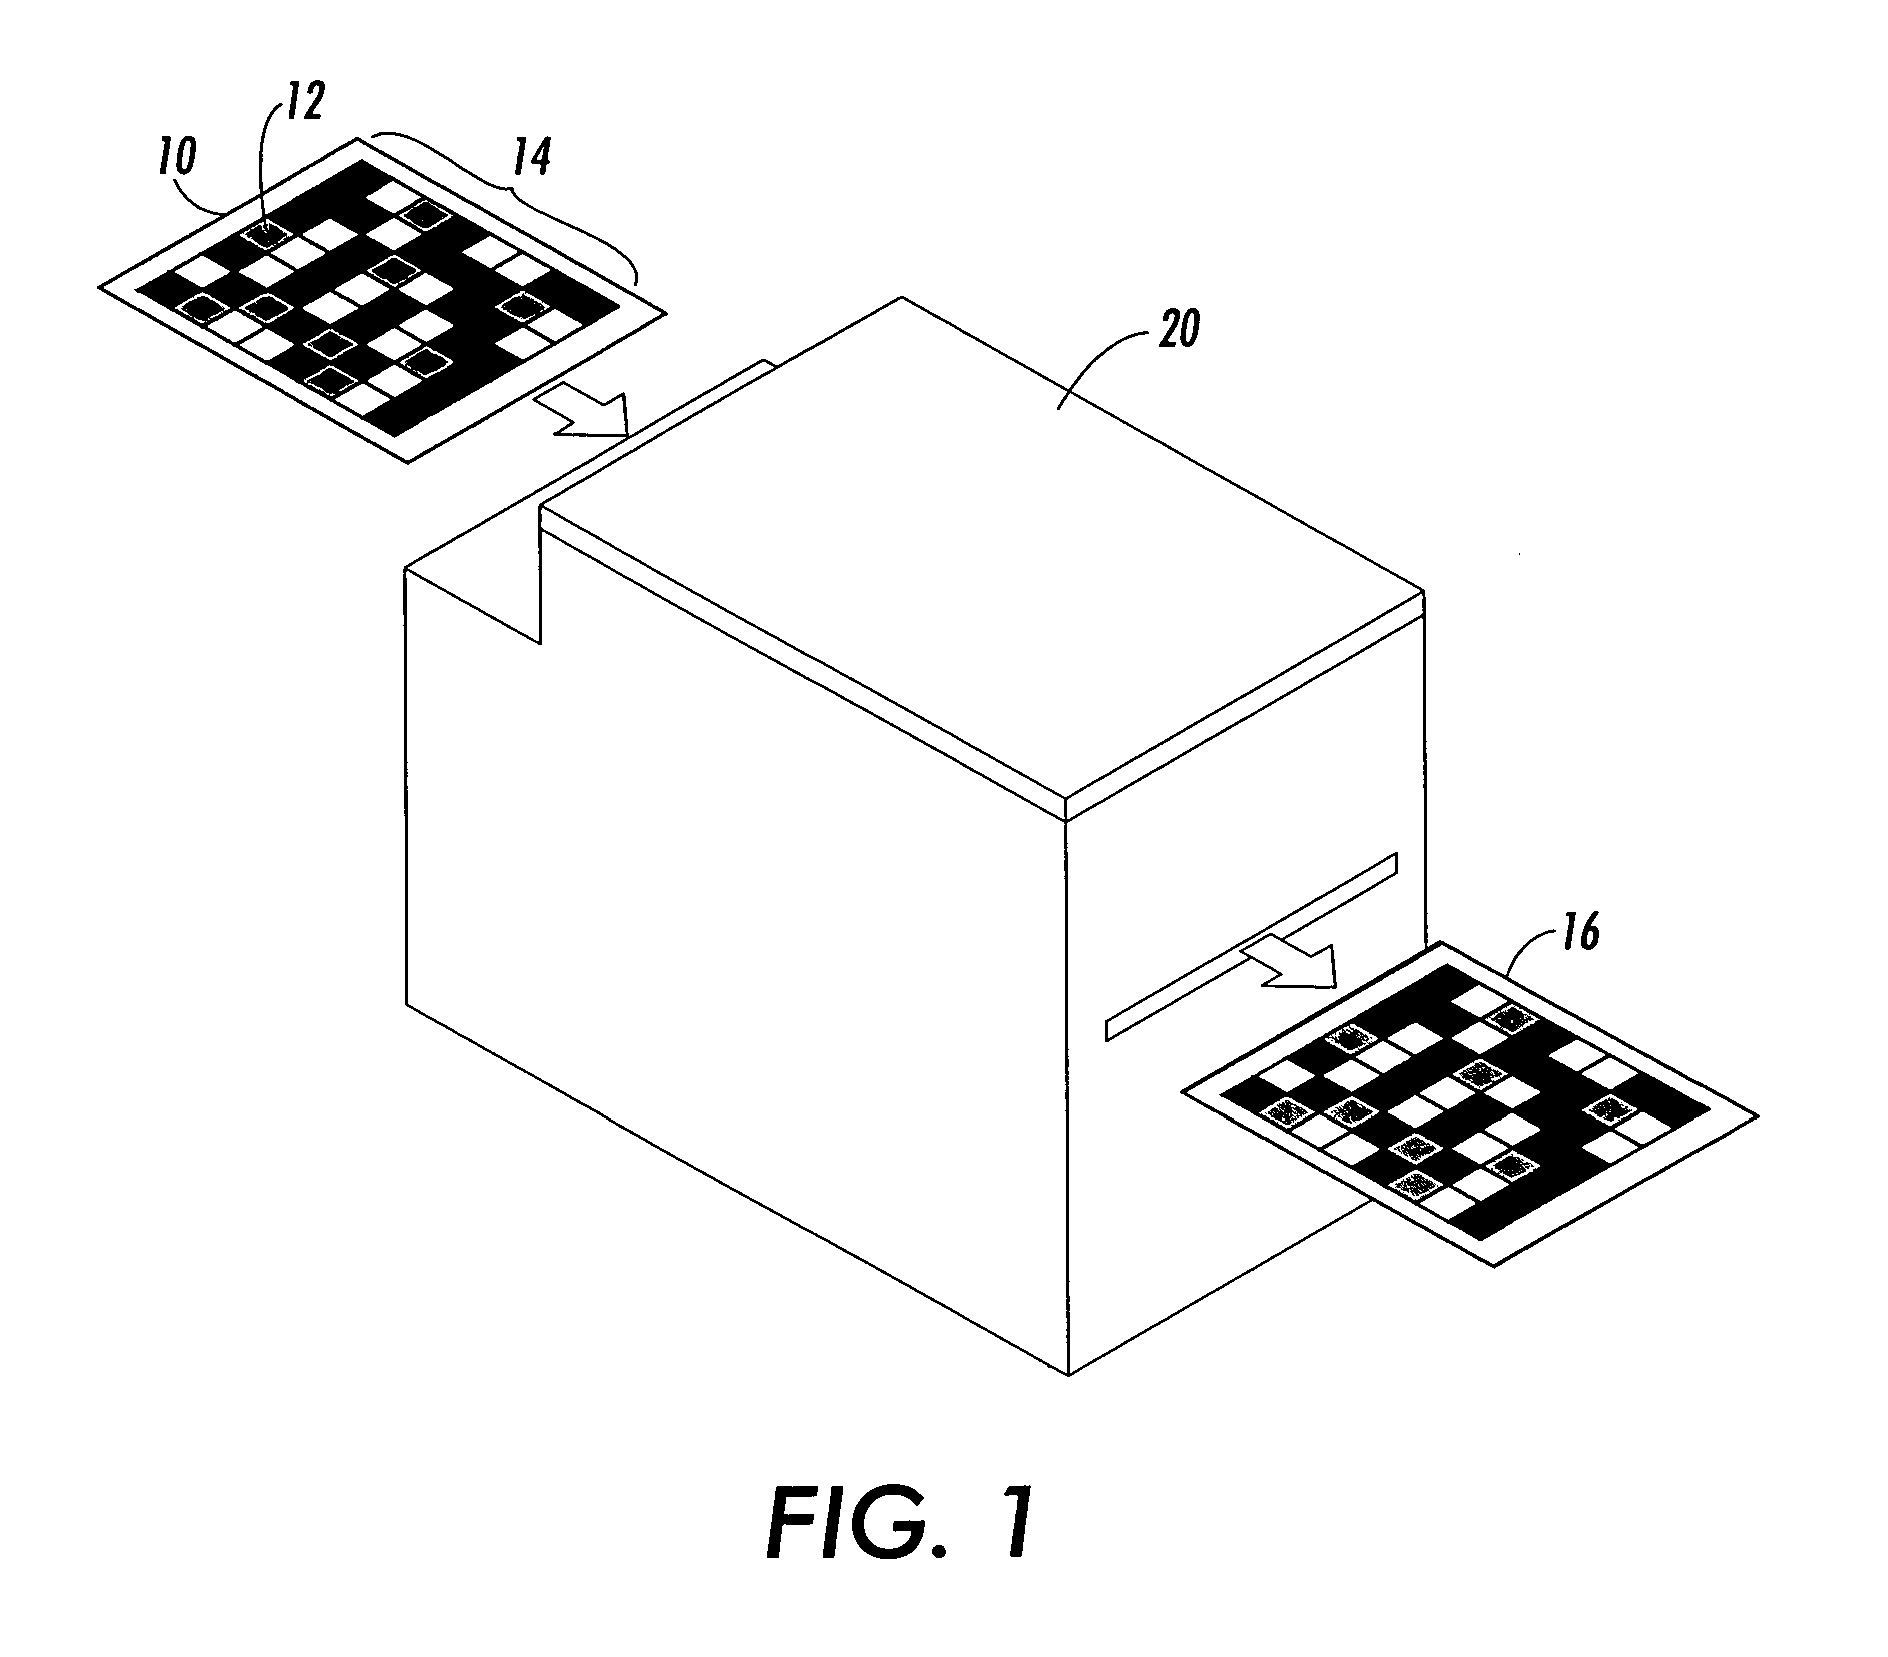 Method for improved characterization of single-pass bi-directional printers